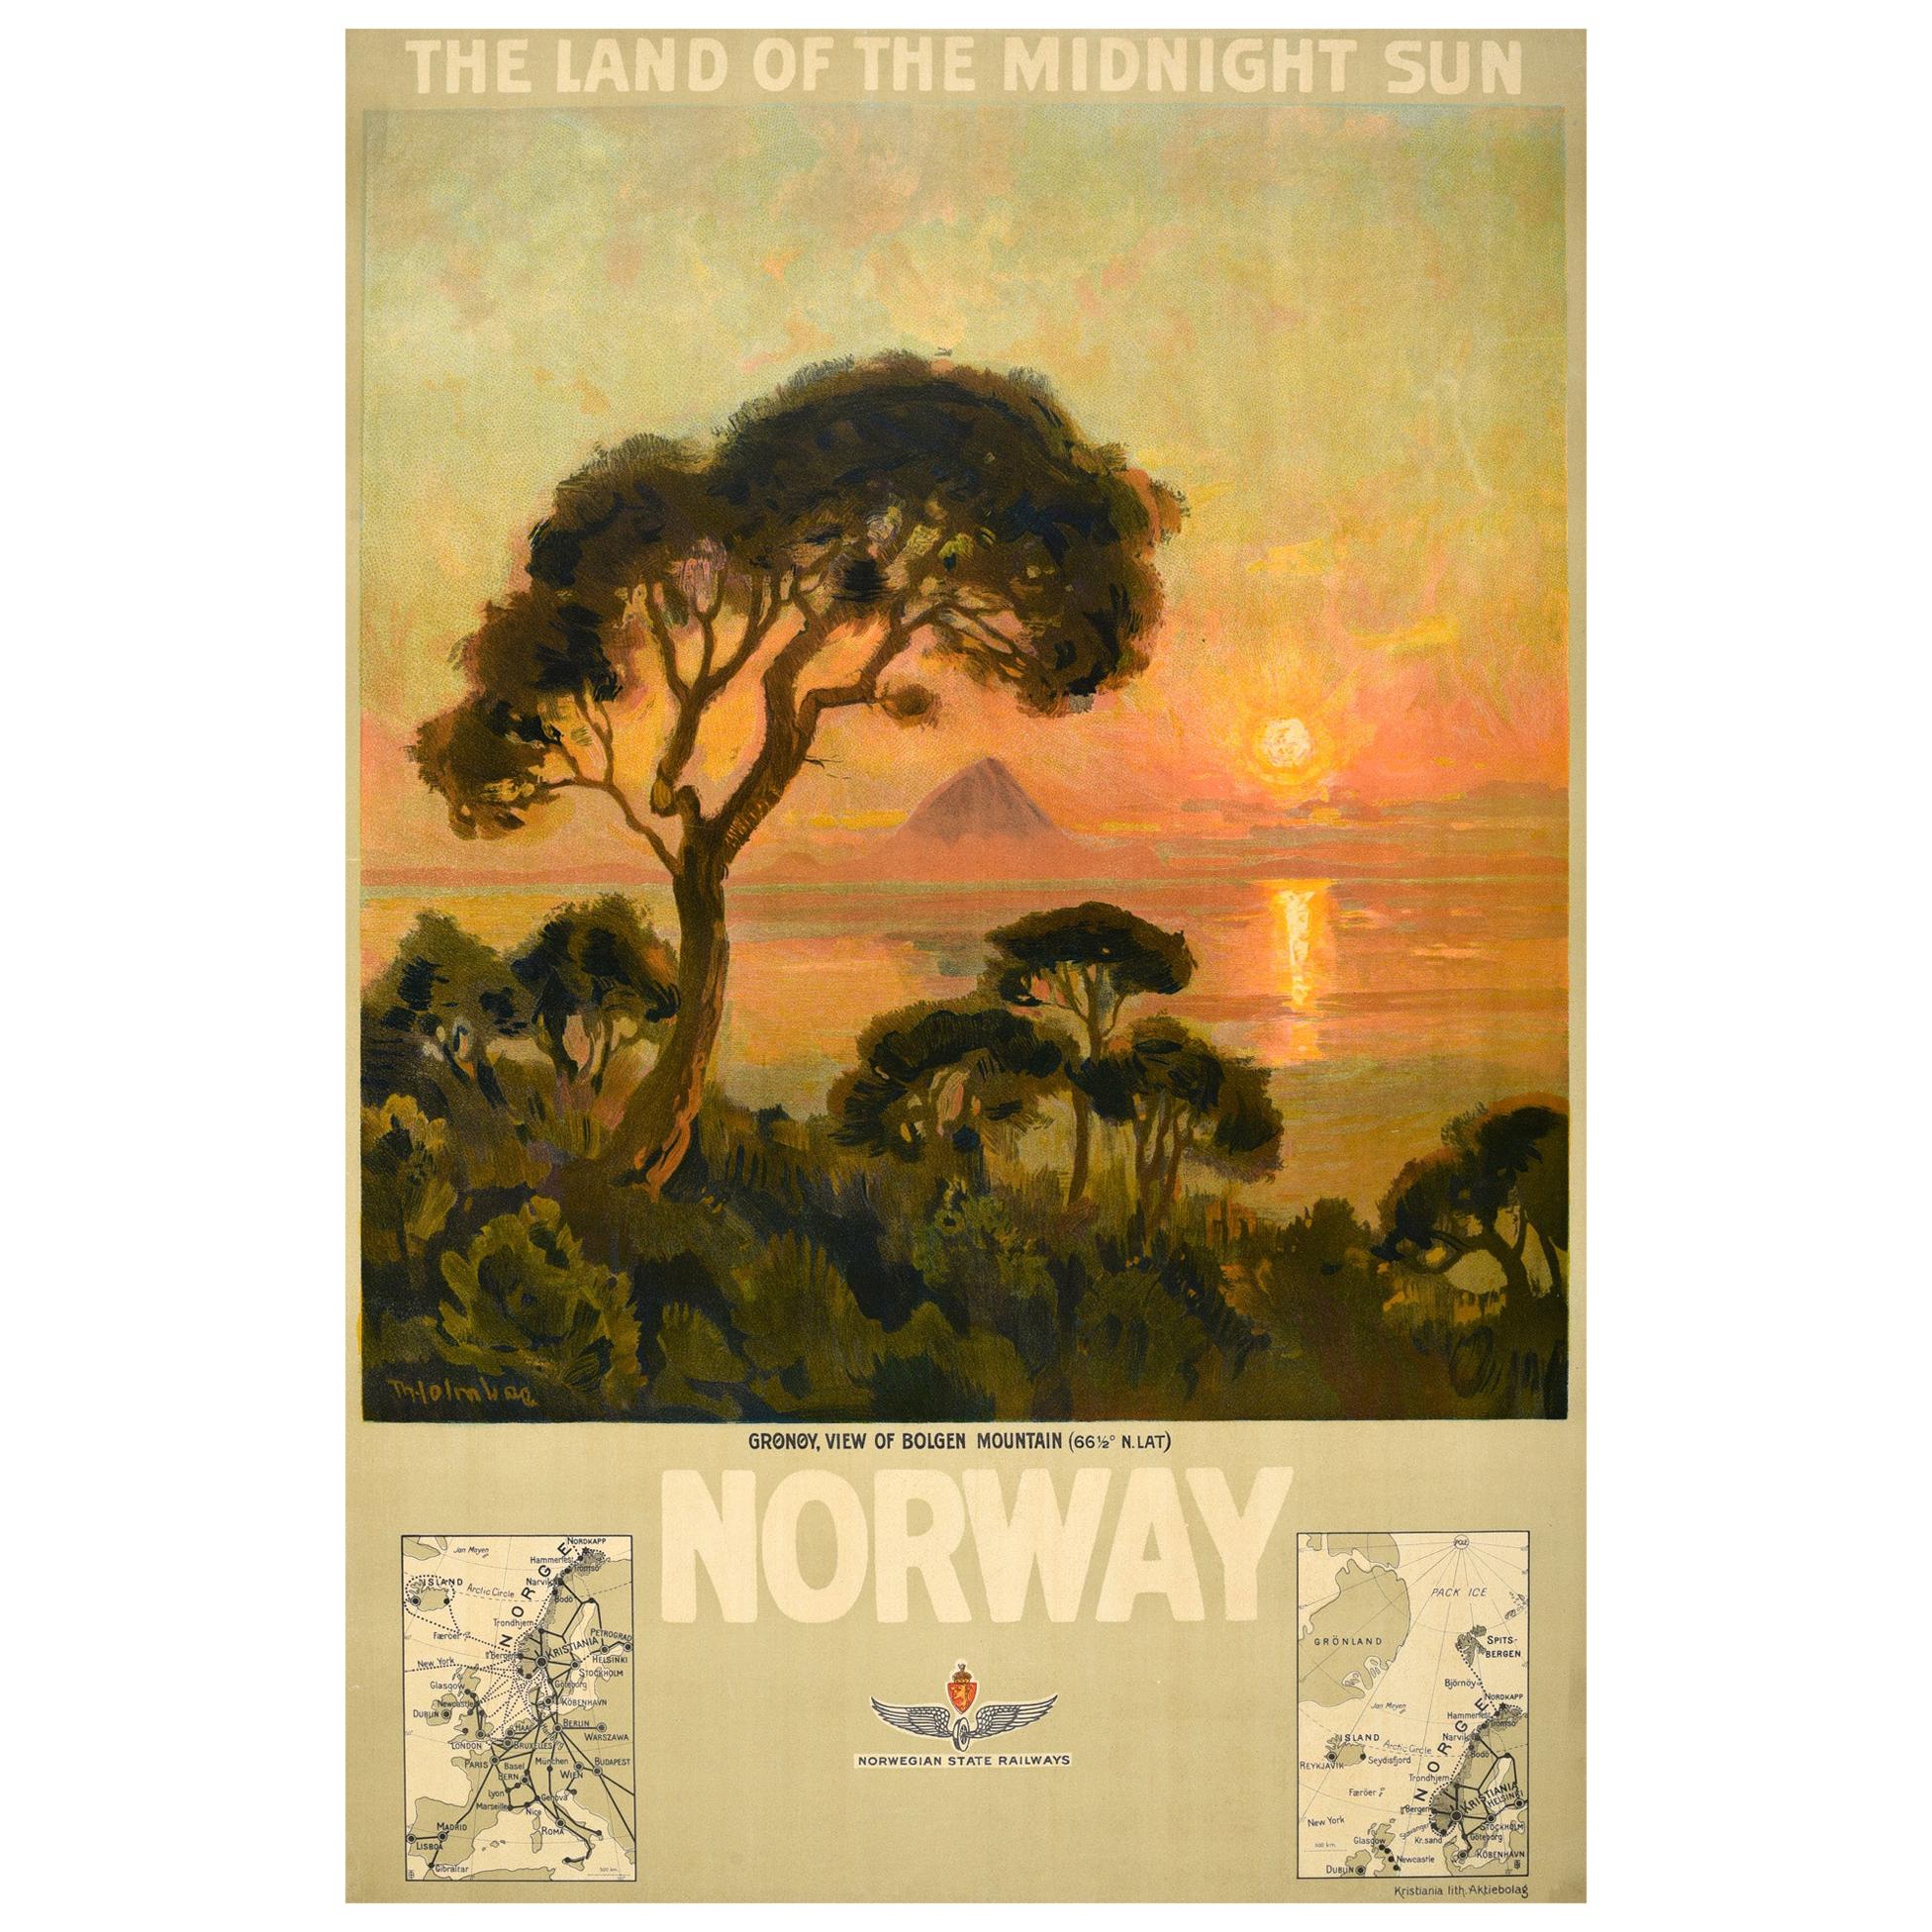 Original Antique Poster Midnight Sun Norway Travel Gronoy Bolgen Mountain View For Sale